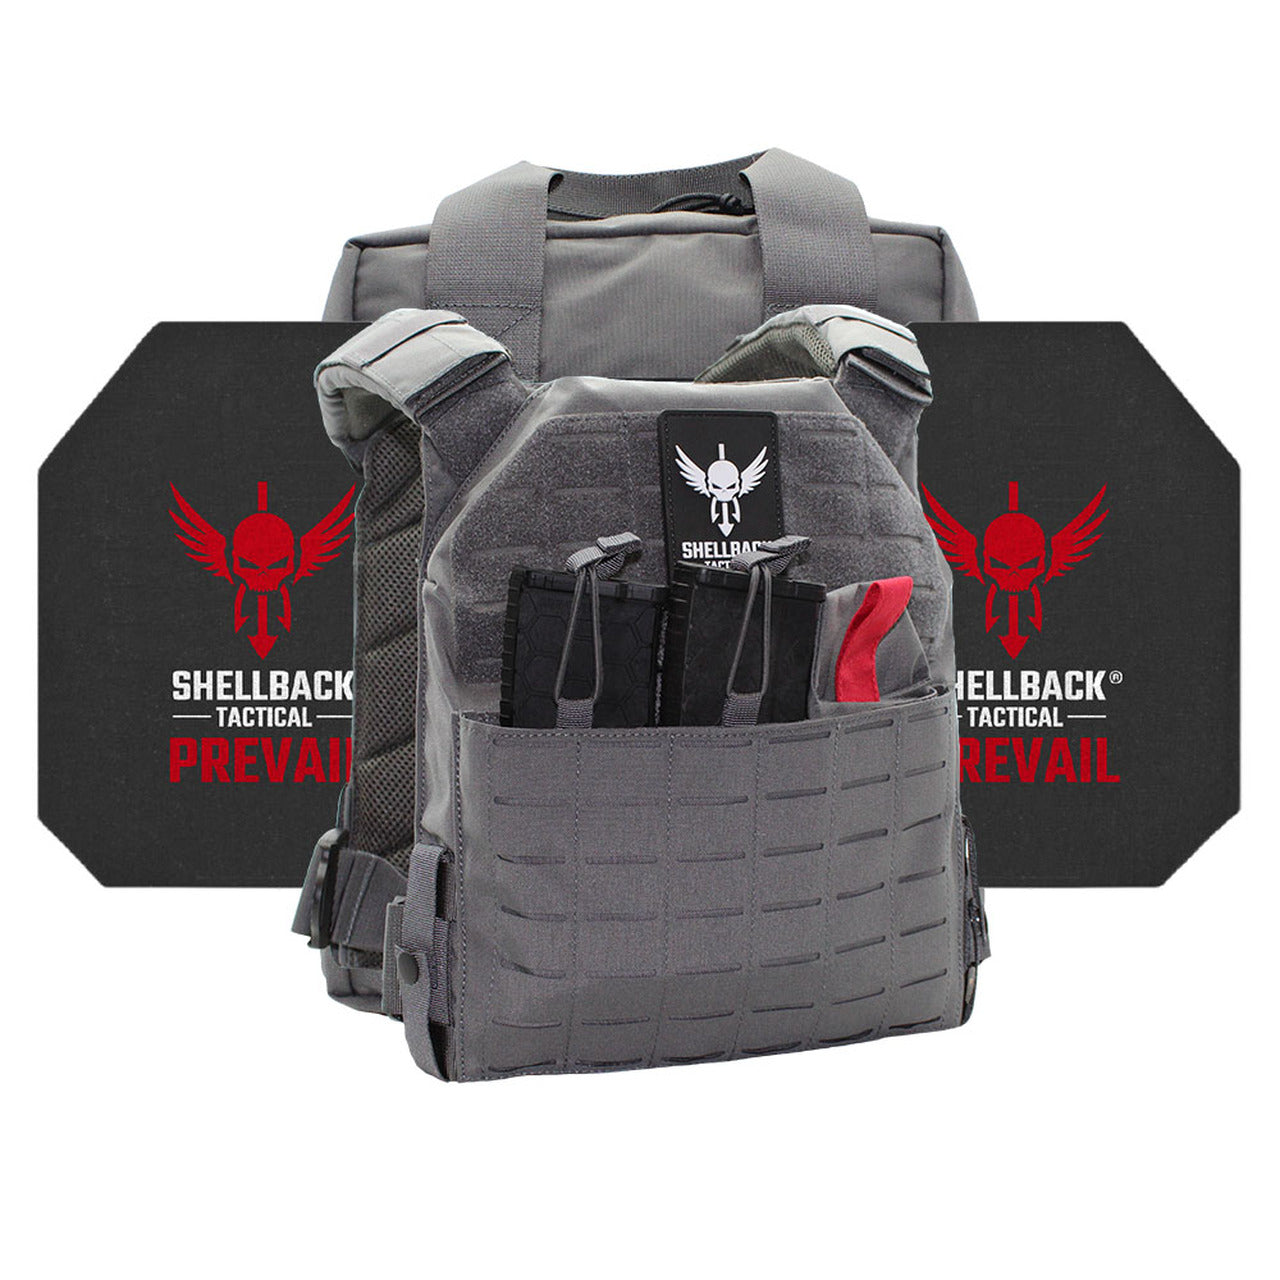 A Shellback Tactical Defender 2.0 Active Shooter Armor Kit with Level IV Model 4S17 Armor Plates vest with a red and black logo on it.